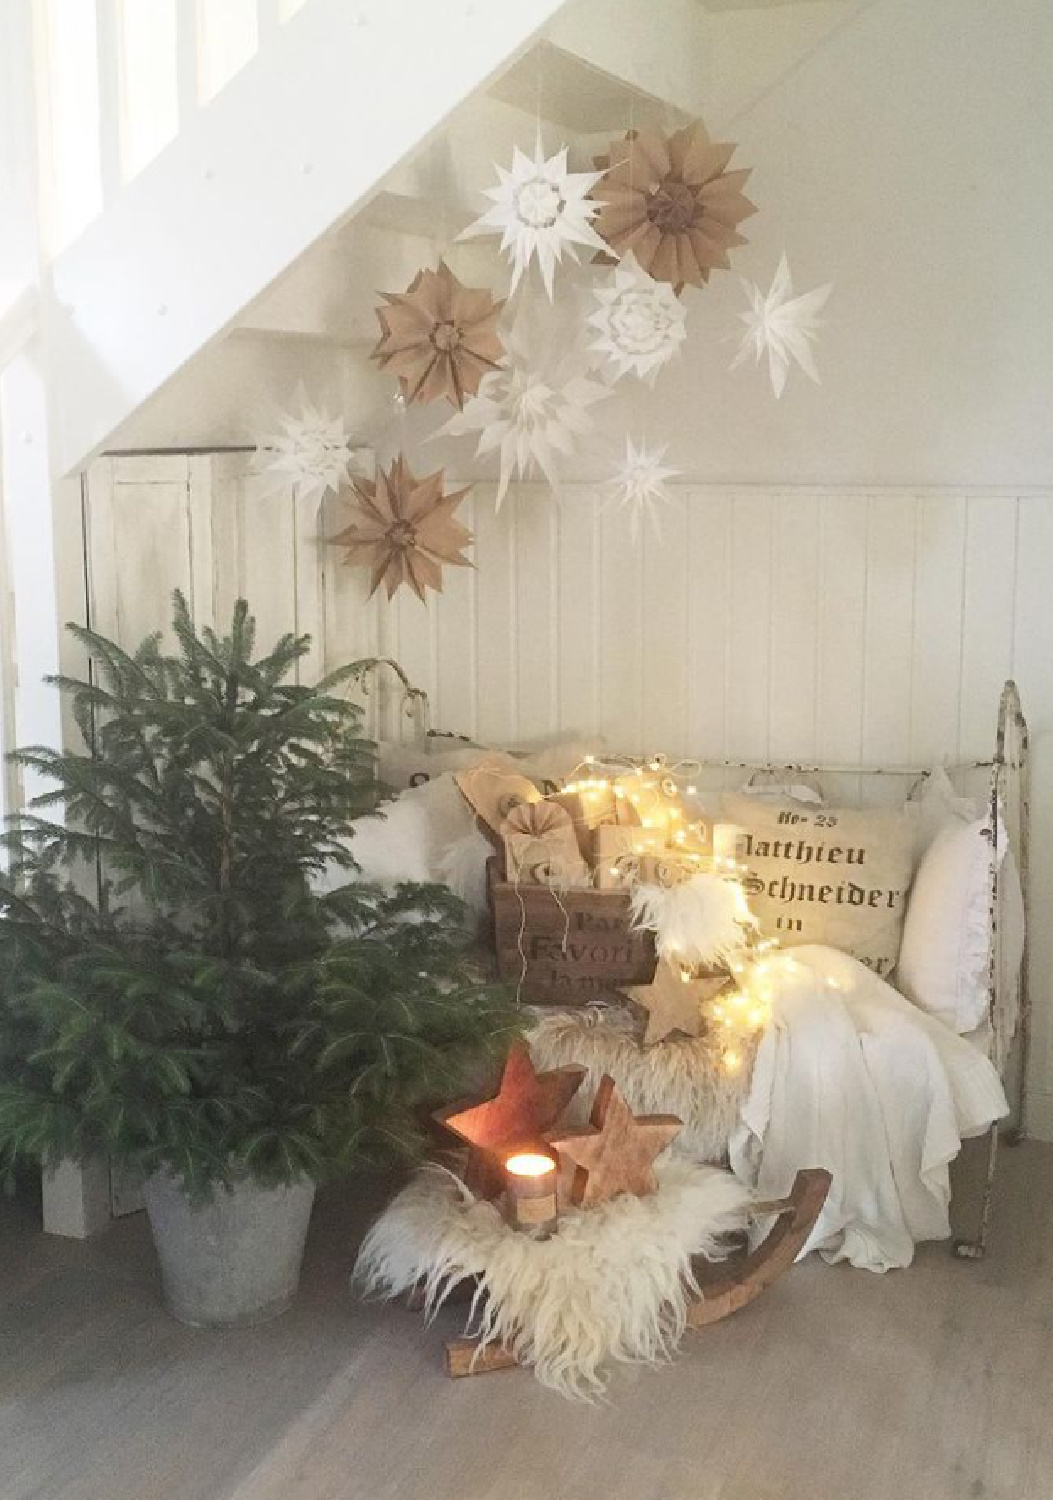 Scandi Christmas decor with paper snowflakes and a cozy settee in a beautiful cottage in Switzerland - Villa Jenal. #frenchnordic #nordicchristmas #scandiholidaydecor